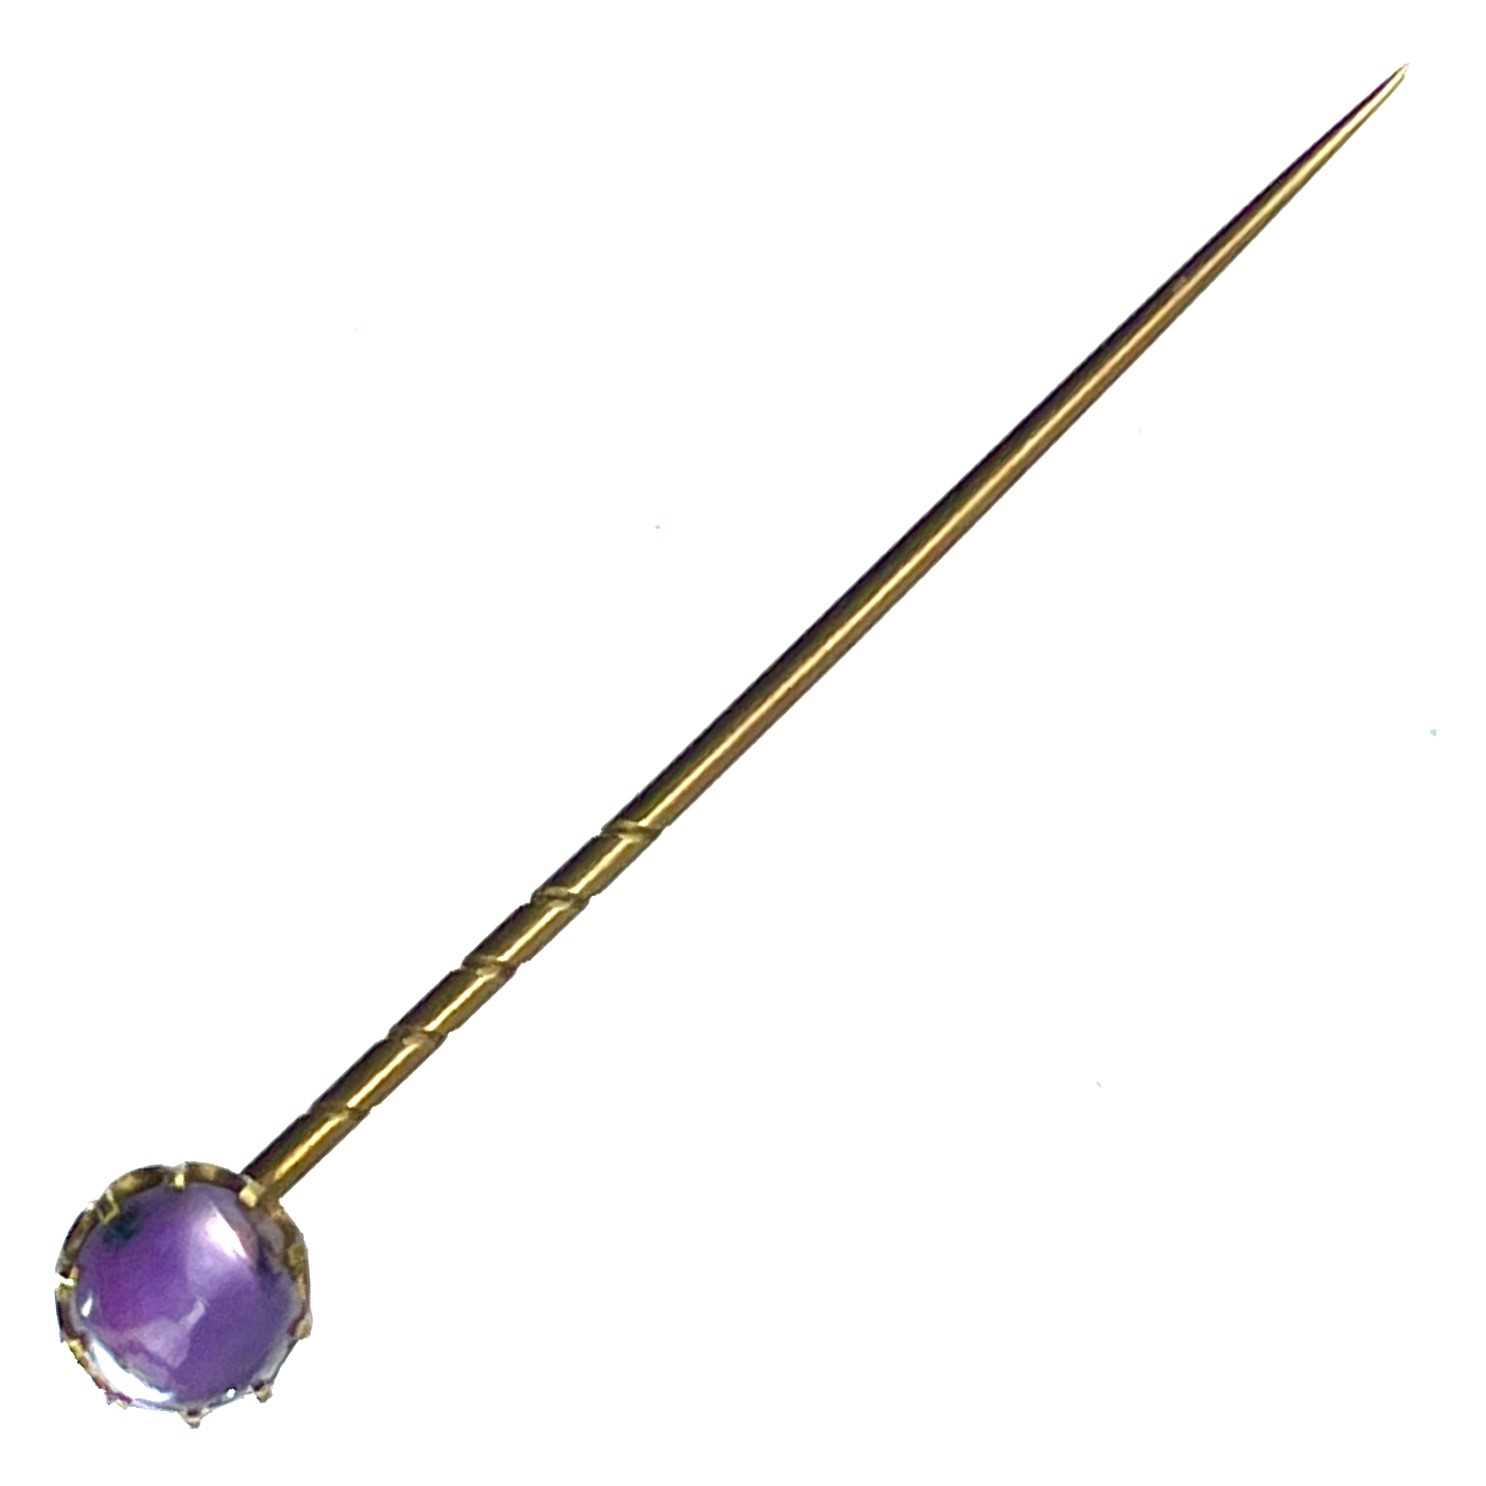 Lot 110 - A high purity gold star ruby cabochon stick pin.